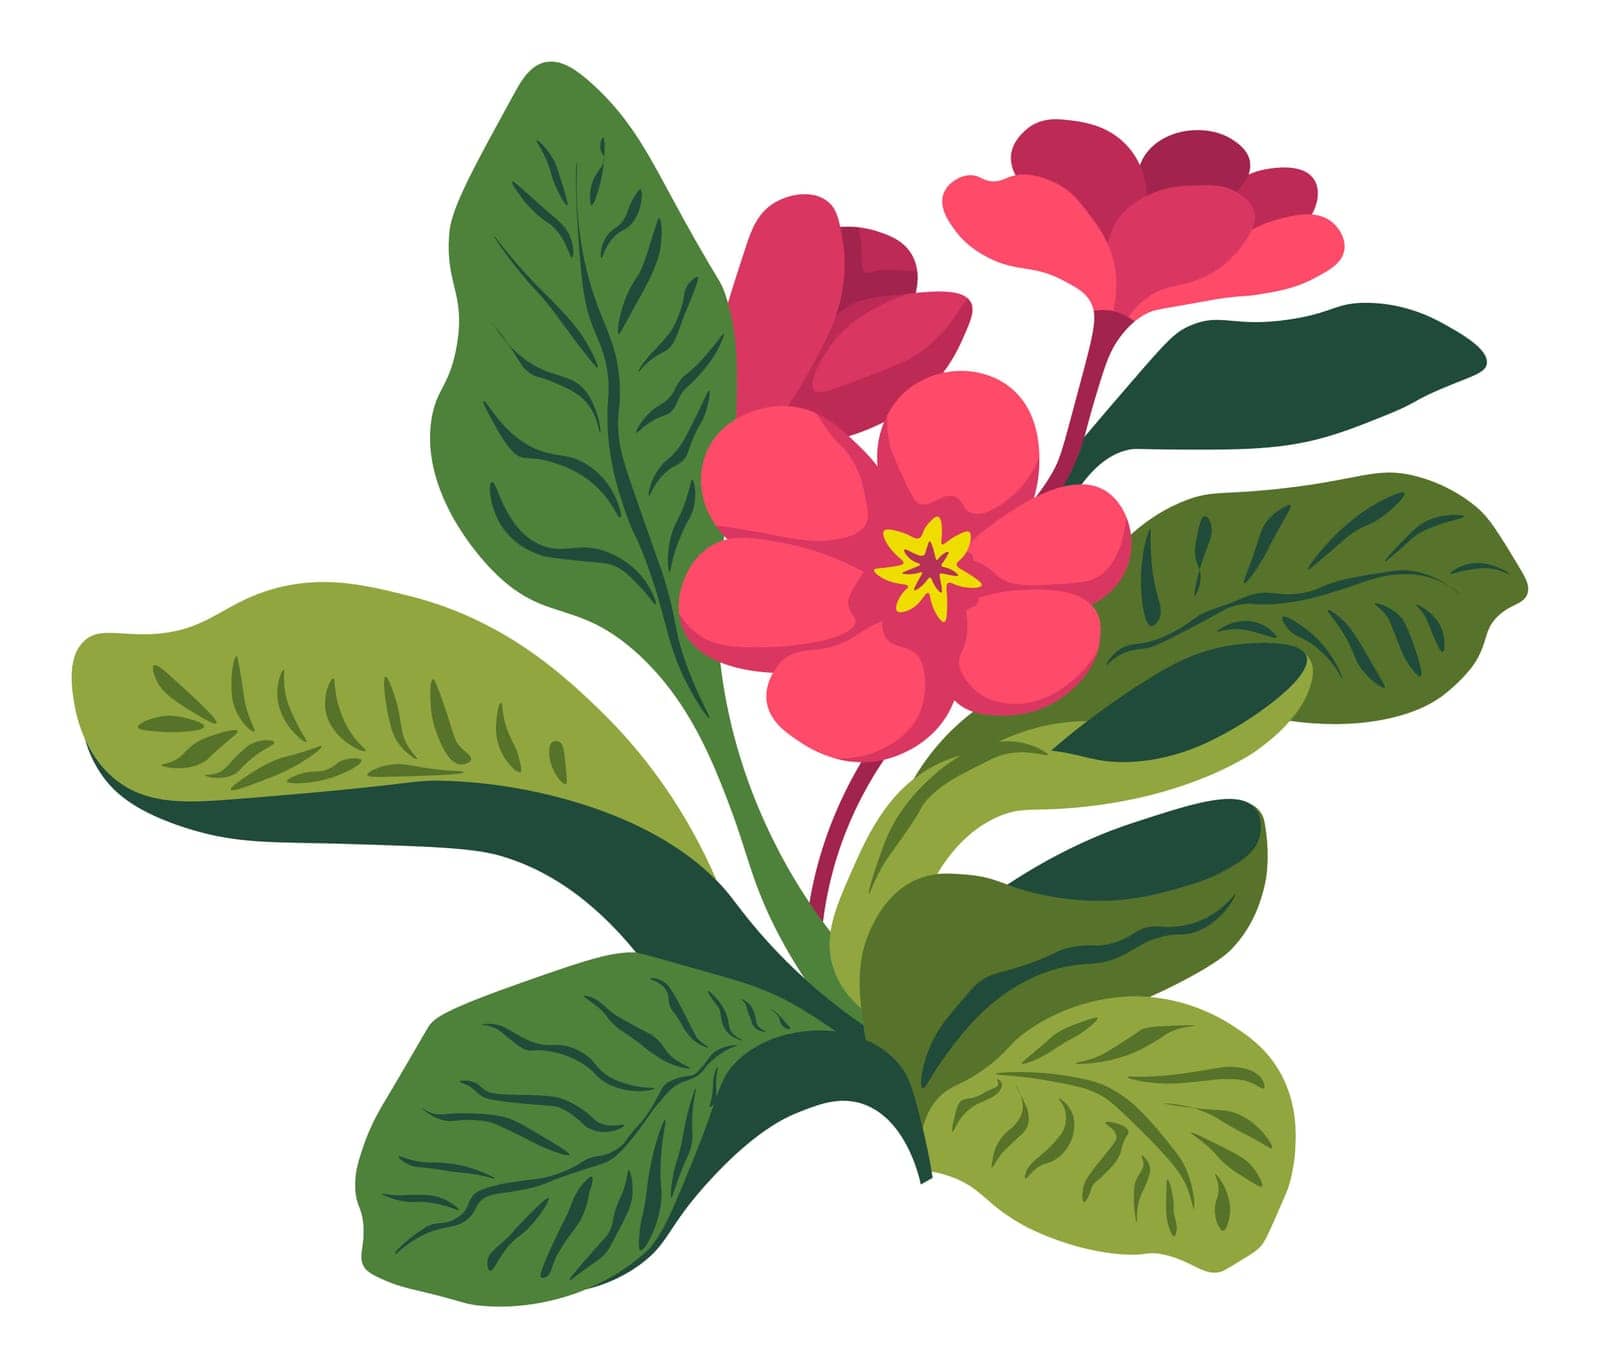 Houseplant flower in blossom, blooming florist composition, isolated flourishing pant with leaves and petals. Growing flora and gardening, shop with tropical and exotic buds. Vector in flat style